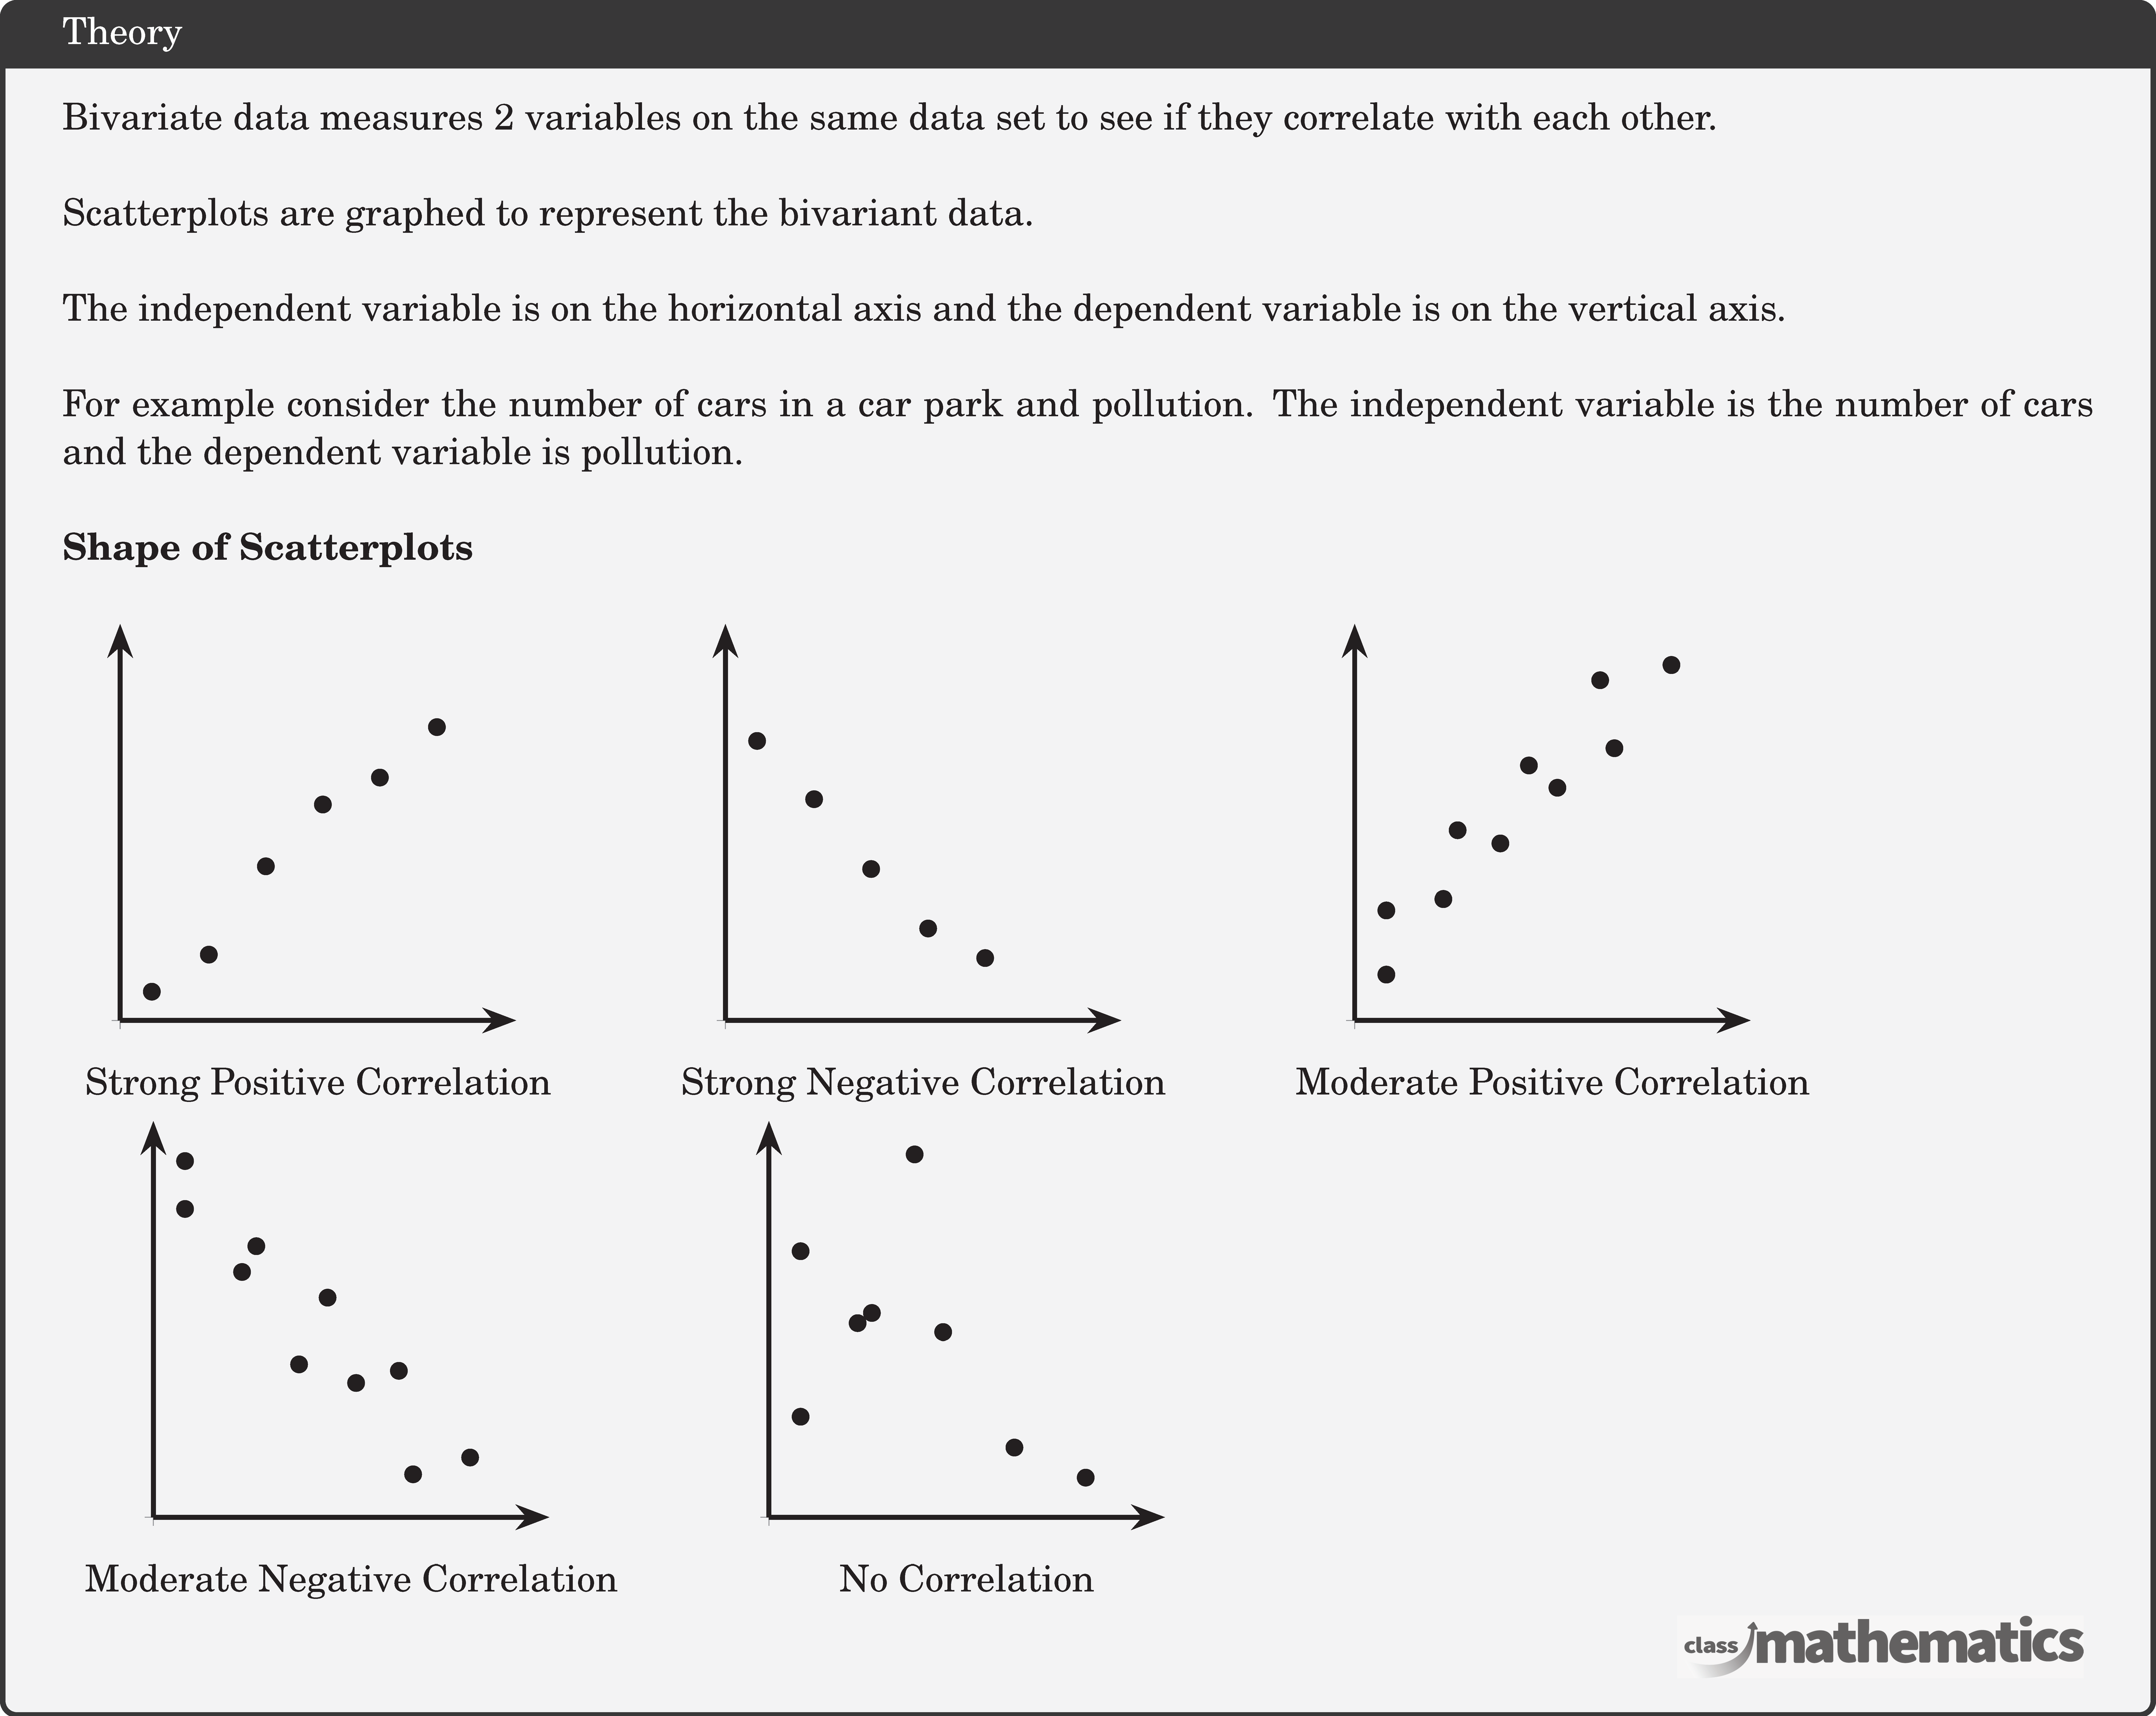 Bivariate data measures 2 variables on the same data set to see if they correlate with each other.\\  Scatterplots are graphed to represent the bivariant data.\\  The independent variable is on the horizontal axis and the dependent variable is on the vertical axis.\\  For example consider the number of cars in a car park and pollution. The independent variable is the number of cars and the dependent variable is pollution.\\  \textbf{Shape of Scatterplots}\\  \adjustbox{valign=t}{ \begin{tikzpicture}[         declare function={a(\x)=\x+0.3*rand;},     ] \def \domain{0.4:4}  \def \xmax{5} \def \xmin{0} \def \ymax{5} \def \ymin{0} \def \xlabel{x} \def \ylabel{y}  \begin{axis}[        axis y line=left,        axis x line=bottom,        axis line style={-Stealth,very thick},        xlabel = Strong Positive Correlation,        width=2in, height=2in,         ymin=\ymin, ymax=\ymax,         xmin=\xmin, xmax=\xmax,         xlabel style={below},         ylabel style={above},         axis on top=false,         xtick distance = 6,         ytick distance = 6,         xtick={},         ytick={},         xticklabels={},         yticklabels={}     ] %FUNCTION \addplot[only marks,samples=6,domain=\domain]{a(x)};  \end{axis} \end{tikzpicture} } \qquad \adjustbox{valign=t}{ \begin{tikzpicture}[         declare function={a(\x)=-\x+4+0.3*rand;},     ] \def \domain{0.4:4}  \def \xmax{5} \def \xmin{0} \def \ymax{5} \def \ymin{0} \def \xlabel{x} \def \ylabel{y}  \begin{axis}[        axis y line=left,        axis x line=bottom,        axis line style={-Stealth,very thick},        xlabel = Strong Negative Correlation,        width=2in, height=2in,         ymin=\ymin, ymax=\ymax,         xmin=\xmin, xmax=\xmax,         xlabel style={below},         ylabel style={above},         axis on top=false,         xtick distance = 6,         ytick distance = 6,         xtick={},         ytick={},         xticklabels={},         yticklabels={}     ] %FUNCTION \addplot[only marks,samples=6,domain=\domain]{a(x)};  \end{axis} \end{tikzpicture} } \qquad \adjustbox{valign=t}{ \begin{tikzpicture}[         declare function={a(\x)=\x+0.2+0.3*rand;},     ] \def \domain{0.4:4}  \def \xmax{5} \def \xmin{0} \def \ymax{5} \def \ymin{0} \def \xlabel{x} \def \ylabel{y}  \begin{axis}[        axis y line=left,        axis x line=bottom,        axis line style={-Stealth,very thick},        xlabel = Moderate Positive Correlation,        width=2in, height=2in,         ymin=\ymin, ymax=\ymax,         xmin=\xmin, xmax=\xmax,         xlabel style={below},         ylabel style={above},         axis on top=false,         xtick distance = 6,         ytick distance = 6,         xtick={},         ytick={},         xticklabels={},         yticklabels={}     ] %FUNCTION \addplot[only marks,samples=6,domain=\domain]{a(x)}; \addplot[only marks,samples=5,domain=\domain]{x+1+0.3*rand}; \end{axis} \end{tikzpicture} } \\ \adjustbox{valign=t}{ \begin{tikzpicture}[         declare function={a(\x)=-\x+4+0.3*rand;},     ] \def \domain{0.4:4}  \def \xmax{5} \def \xmin{0} \def \ymax{5} \def \ymin{0} \def \xlabel{x} \def \ylabel{y}  \begin{axis}[        axis y line=left,        axis x line=bottom,        axis line style={-Stealth,very thick},        xlabel = Moderate Negative Correlation,        width=2in, height=2in,         ymin=\ymin, ymax=\ymax,         xmin=\xmin, xmax=\xmax,         xlabel style={below},         ylabel style={above},         axis on top=false,         xtick distance = 6,         ytick distance = 6,         xtick={},         ytick={},         xticklabels={},         yticklabels={}     ] %FUNCTION \addplot[only marks,samples=6,domain=\domain]{a(x)}; \addplot[only marks,samples=5,domain=\domain]{-x+5+0.3*rand}; \end{axis} \end{tikzpicture} } \qquad \adjustbox{valign=t}{ \begin{tikzpicture}[         declare function={a(\x)=\x^2+1+0.5*rand;},     ] \def \domain{0.4:4}  \def \xmax{5} \def \xmin{0} \def \ymax{5} \def \ymin{0} \def \xlabel{x} \def \ylabel{y}  \begin{axis}[        axis y line=left,        axis x line=bottom,        axis line style={-Stealth,very thick},        xlabel = No Correlation,        width=2in, height=2in,         ymin=\ymin, ymax=\ymax,         xmin=\xmin, xmax=\xmax,         xlabel style={below},         ylabel style={above},         axis on top=false,         xtick distance = 6,         ytick distance = 6,         xtick={},         ytick={},         xticklabels={},         yticklabels={}     ] %FUNCTION \addplot[only marks,samples=6,domain=\domain]{a(x)}; \addplot[only marks,samples=5,domain=\domain]{-x+4+0.7*rand}; \end{axis} \end{tikzpicture} }